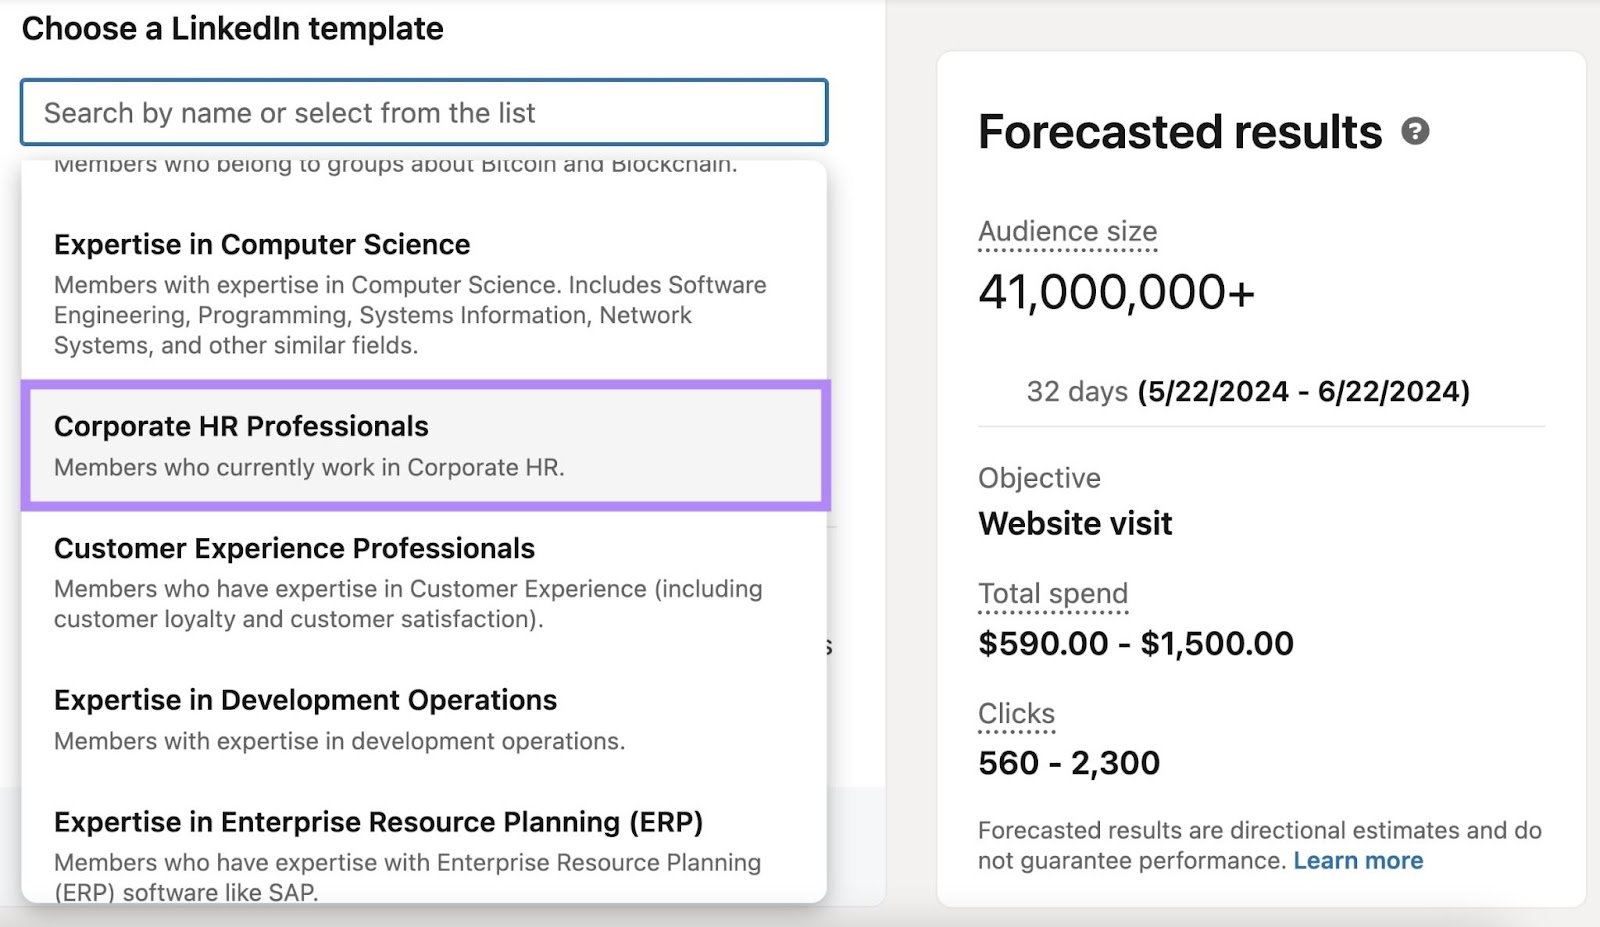 LinkedIn template 'corporate hr professionals' selected alongside forecasted results